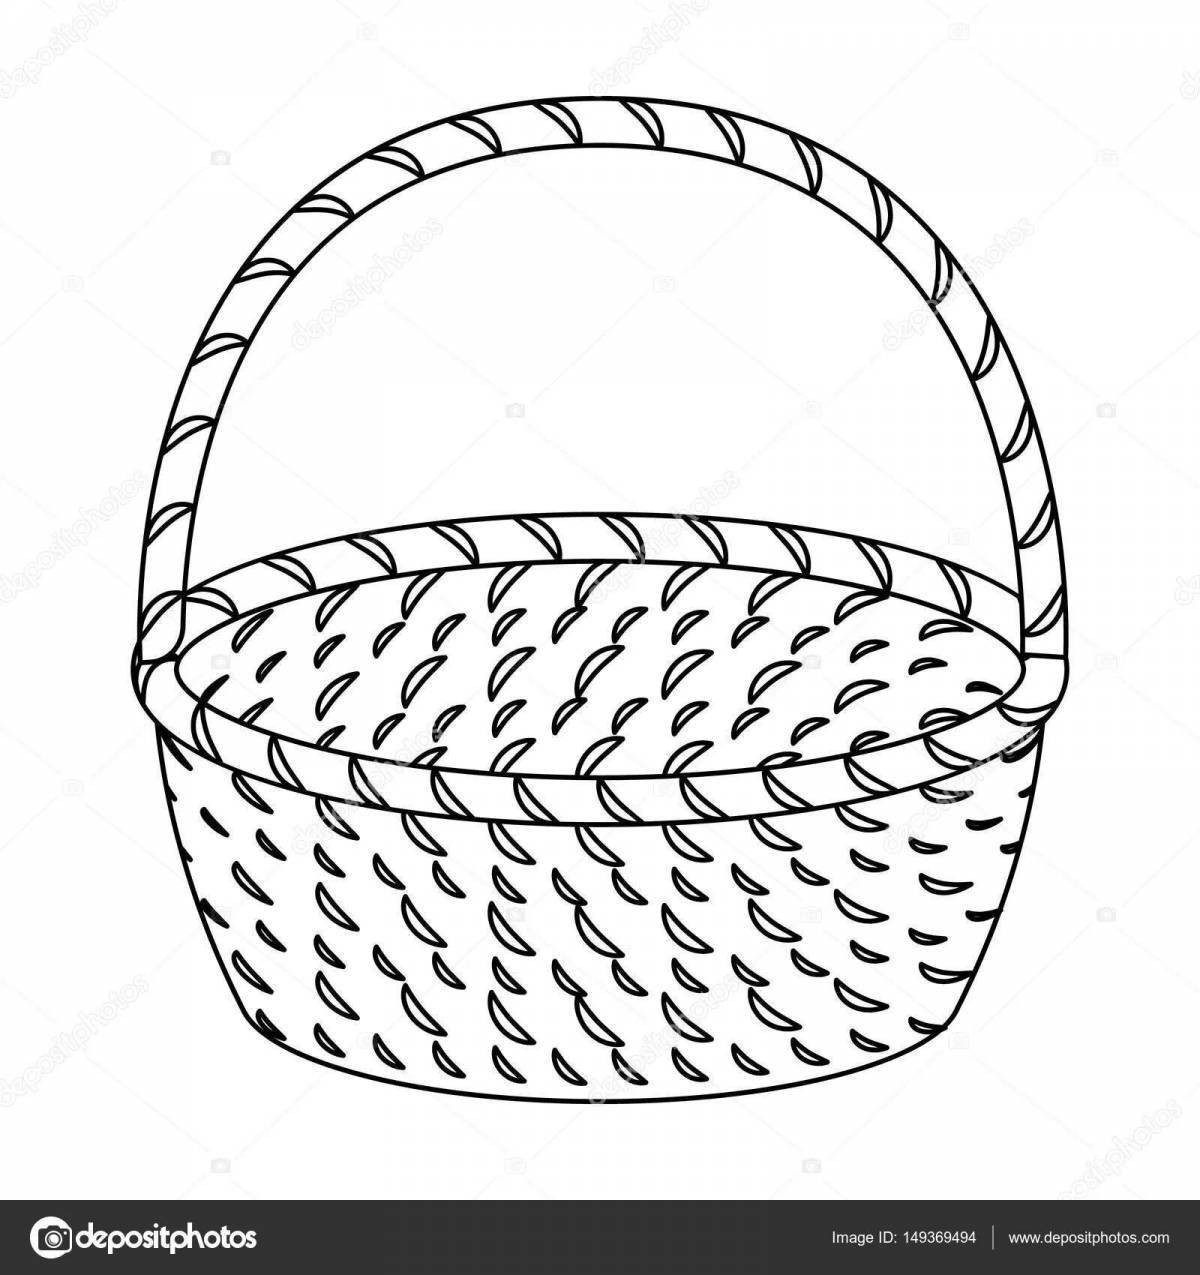 Playful coloring page with empty basket for kids